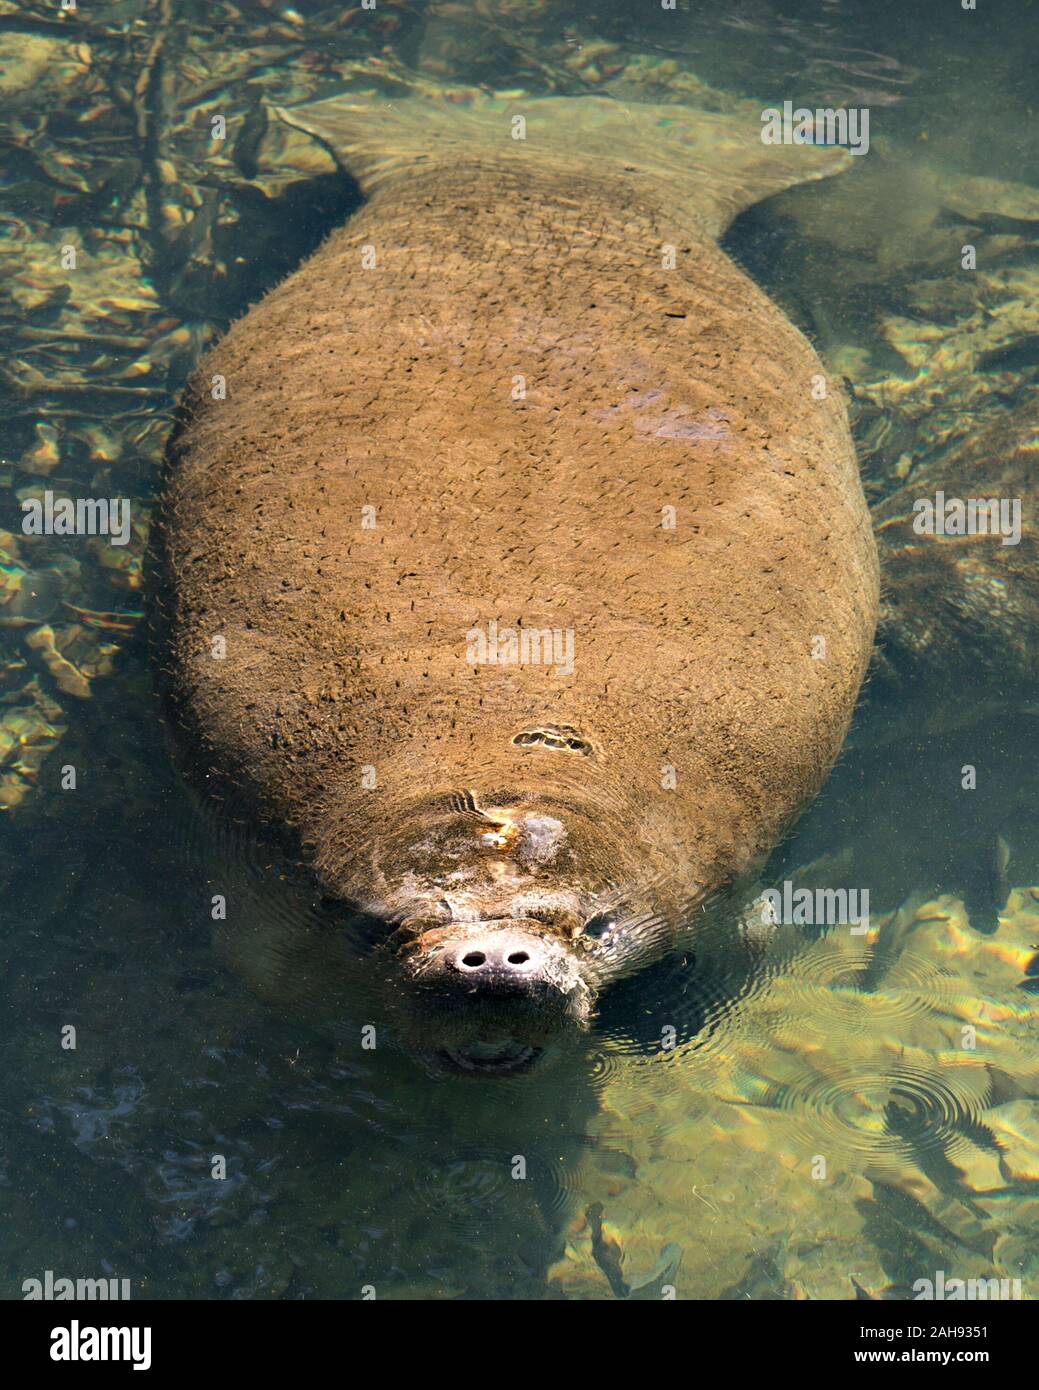 Manatee marine mammal displaying its nostril, eyes, paddle, flippers, surrounded by fish in the warm outflow of water from Florida river. Stock Photo